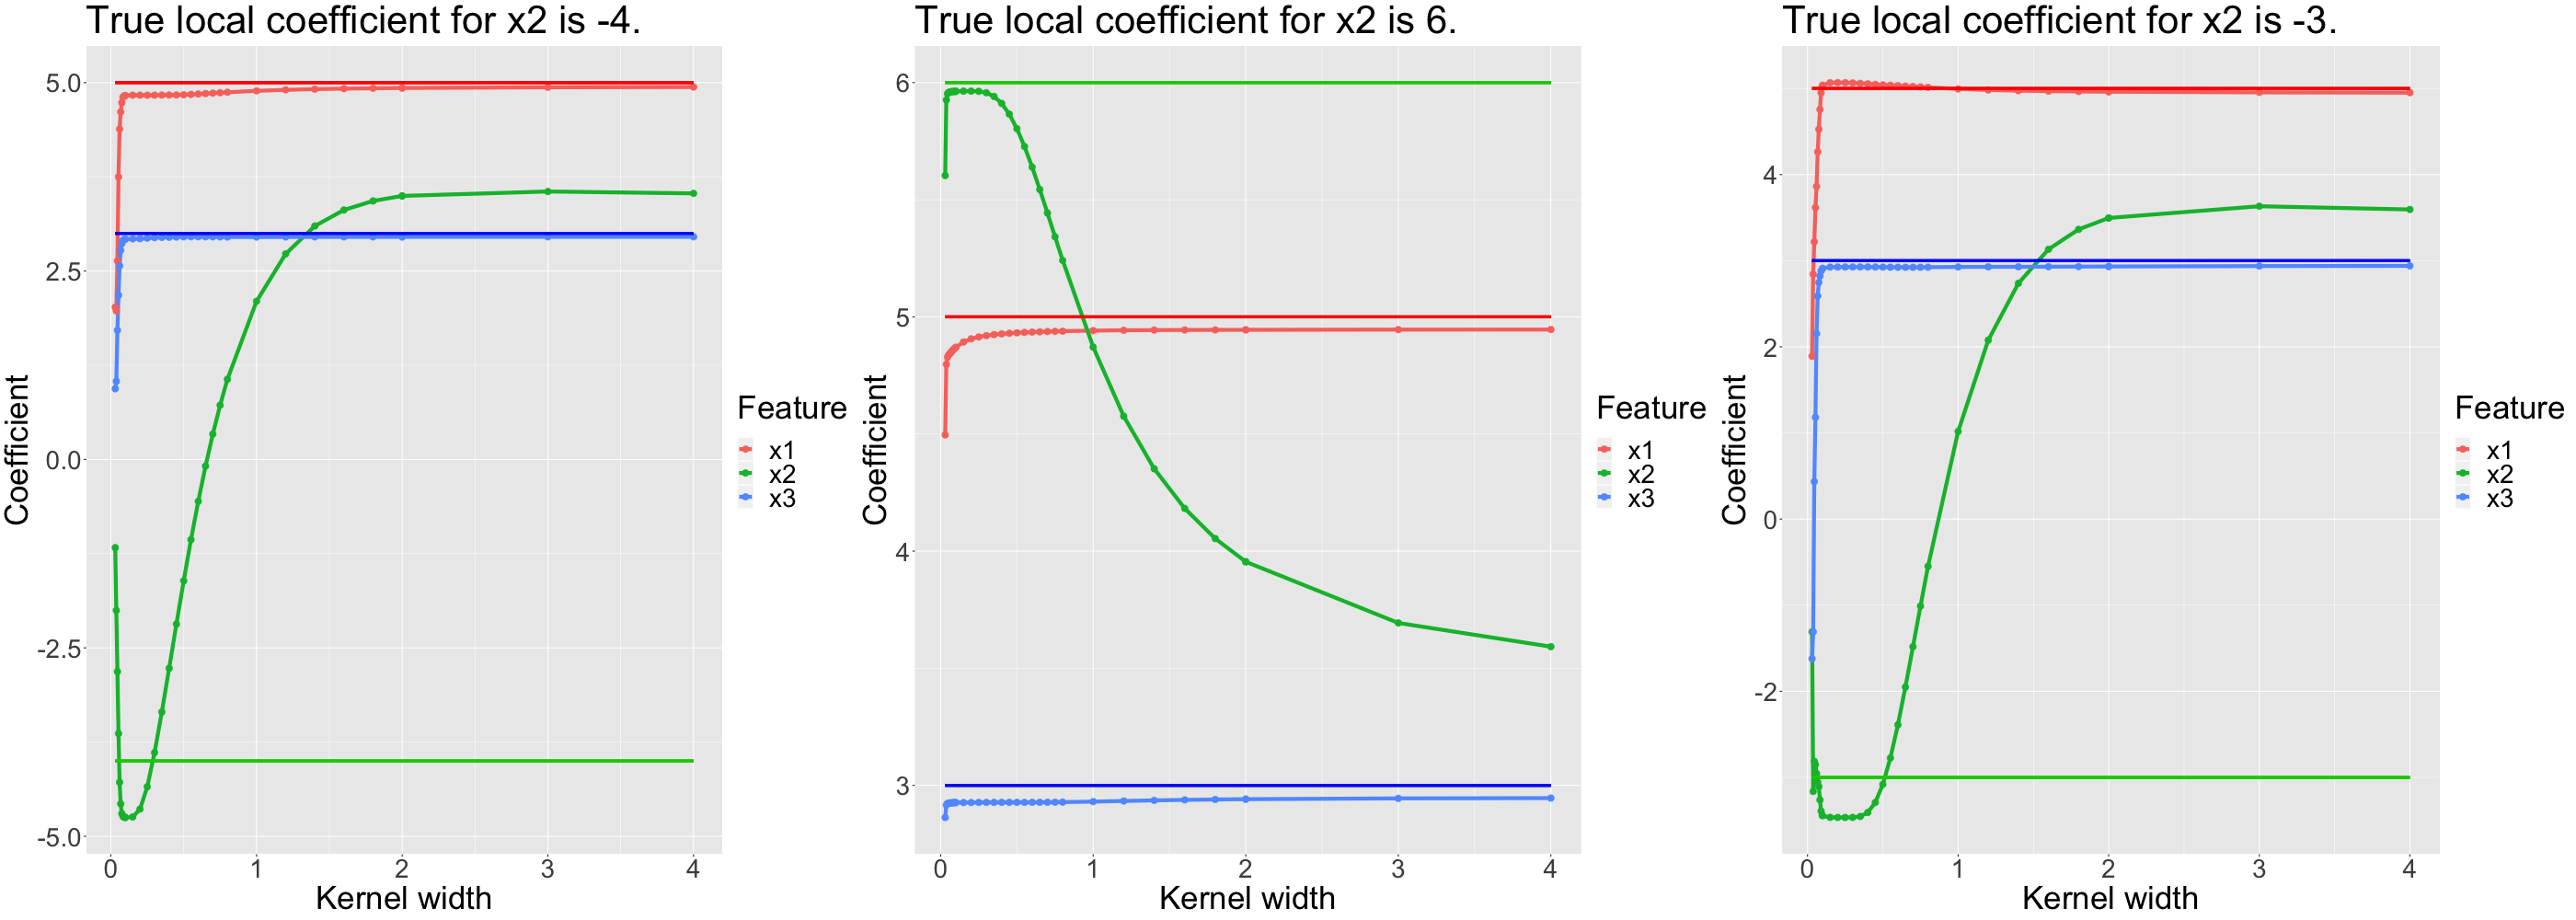 Simulated data: Local coefficients for different kernel widths explaining non-linear relationship (for $x_2$).